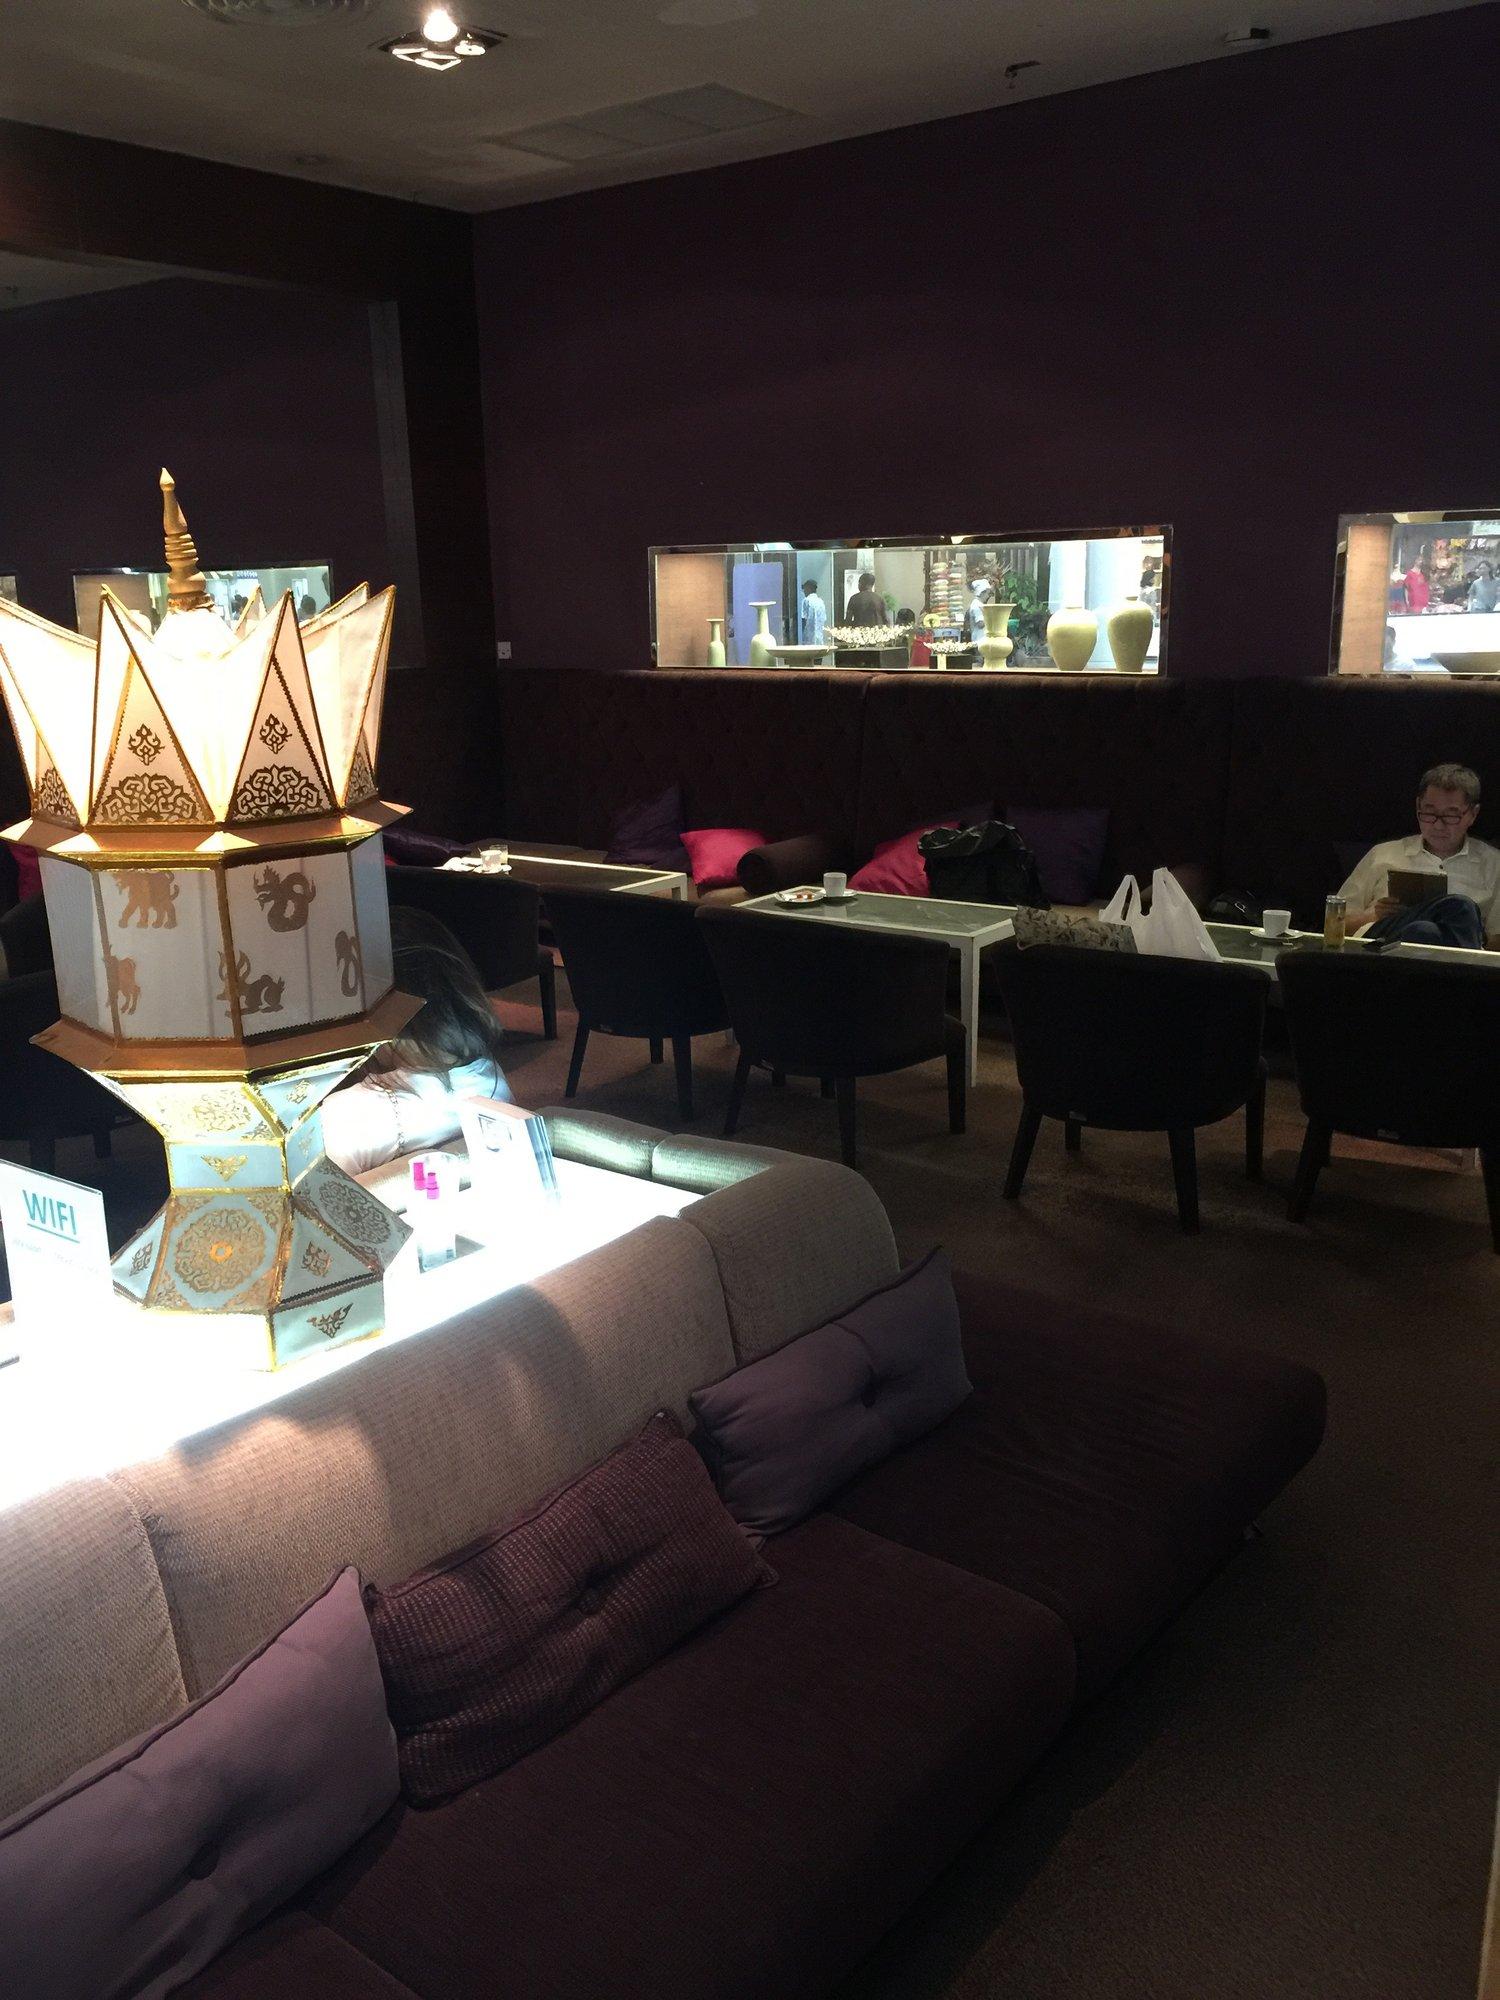 Thai Airways Royal Orchid Lounge image 20 of 22